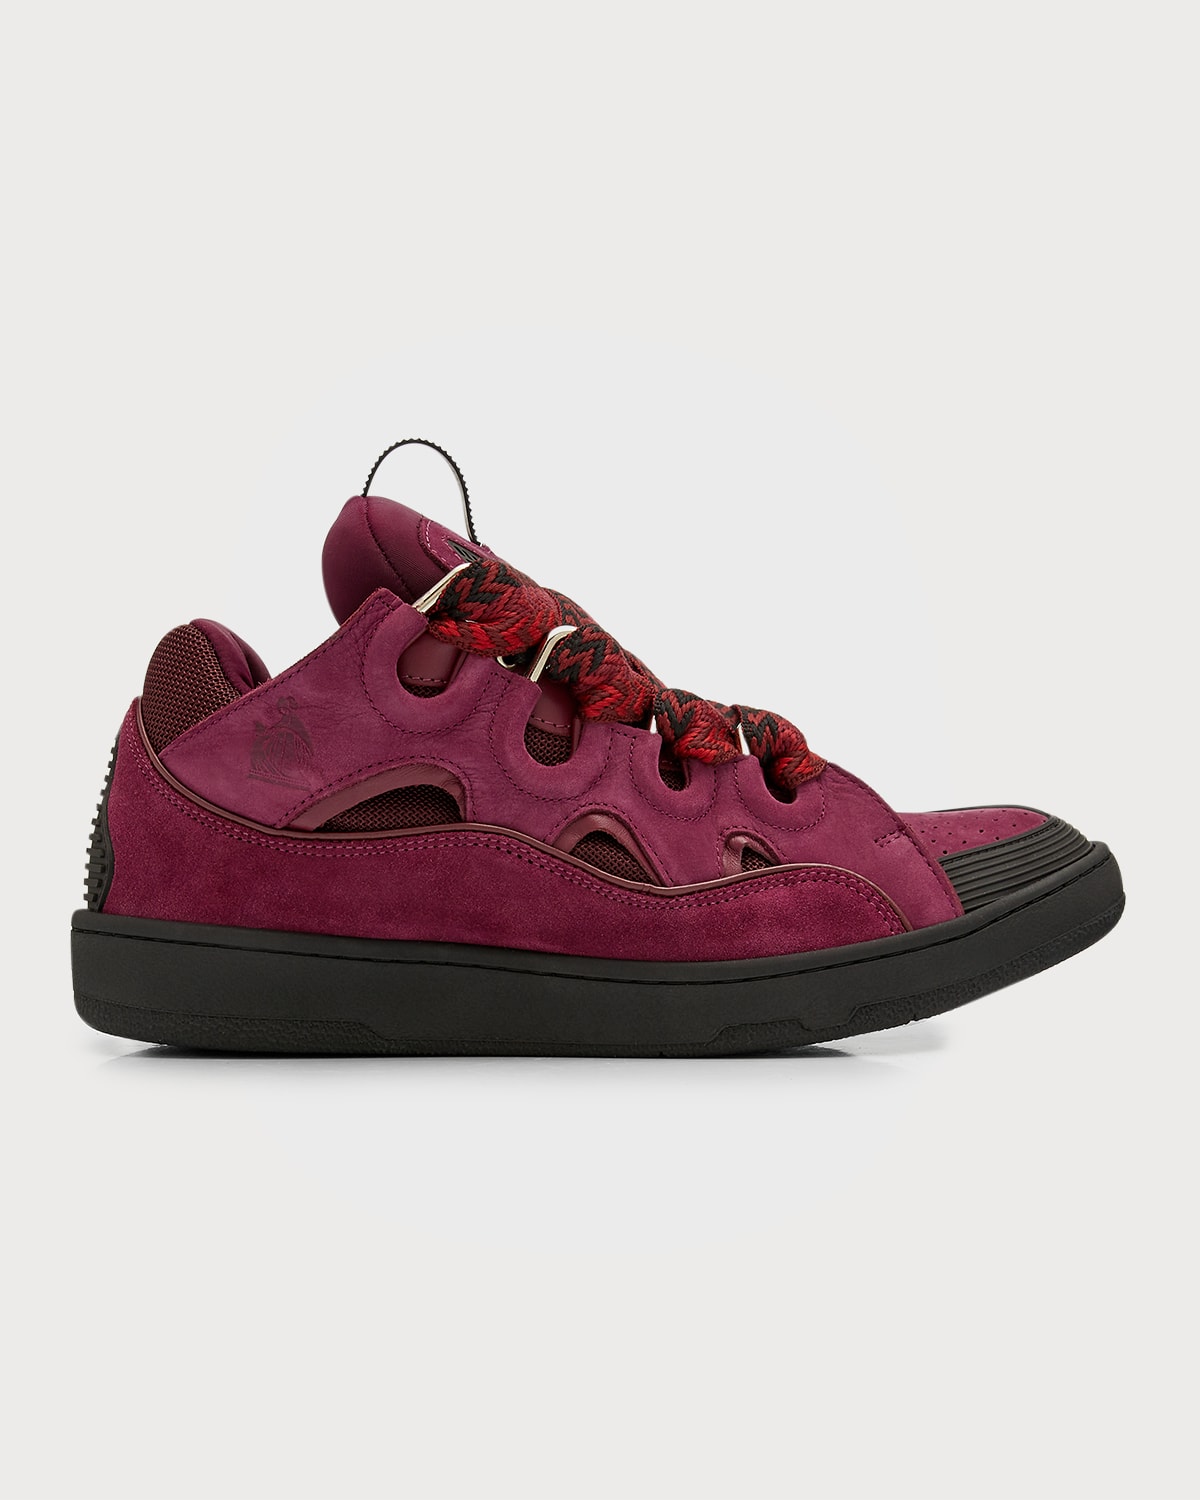 Men's Tonal Textile and Leather Low-Top Curb Sneakers